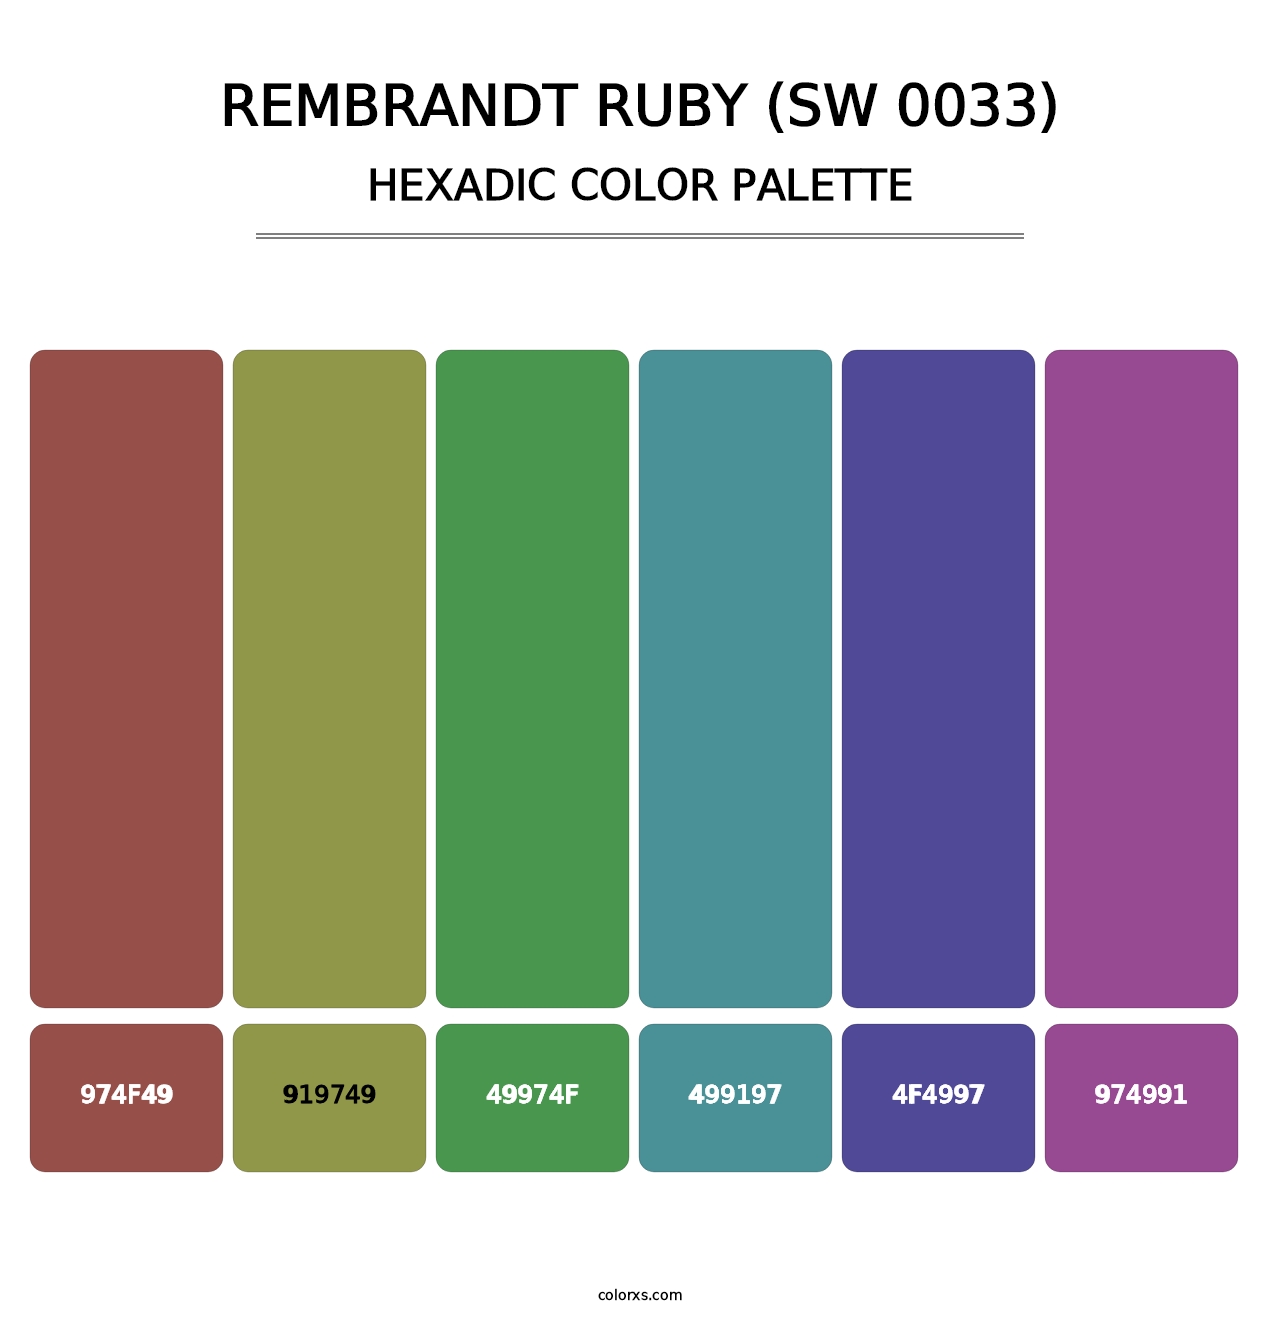 Rembrandt Ruby (SW 0033) - Hexadic Color Palette